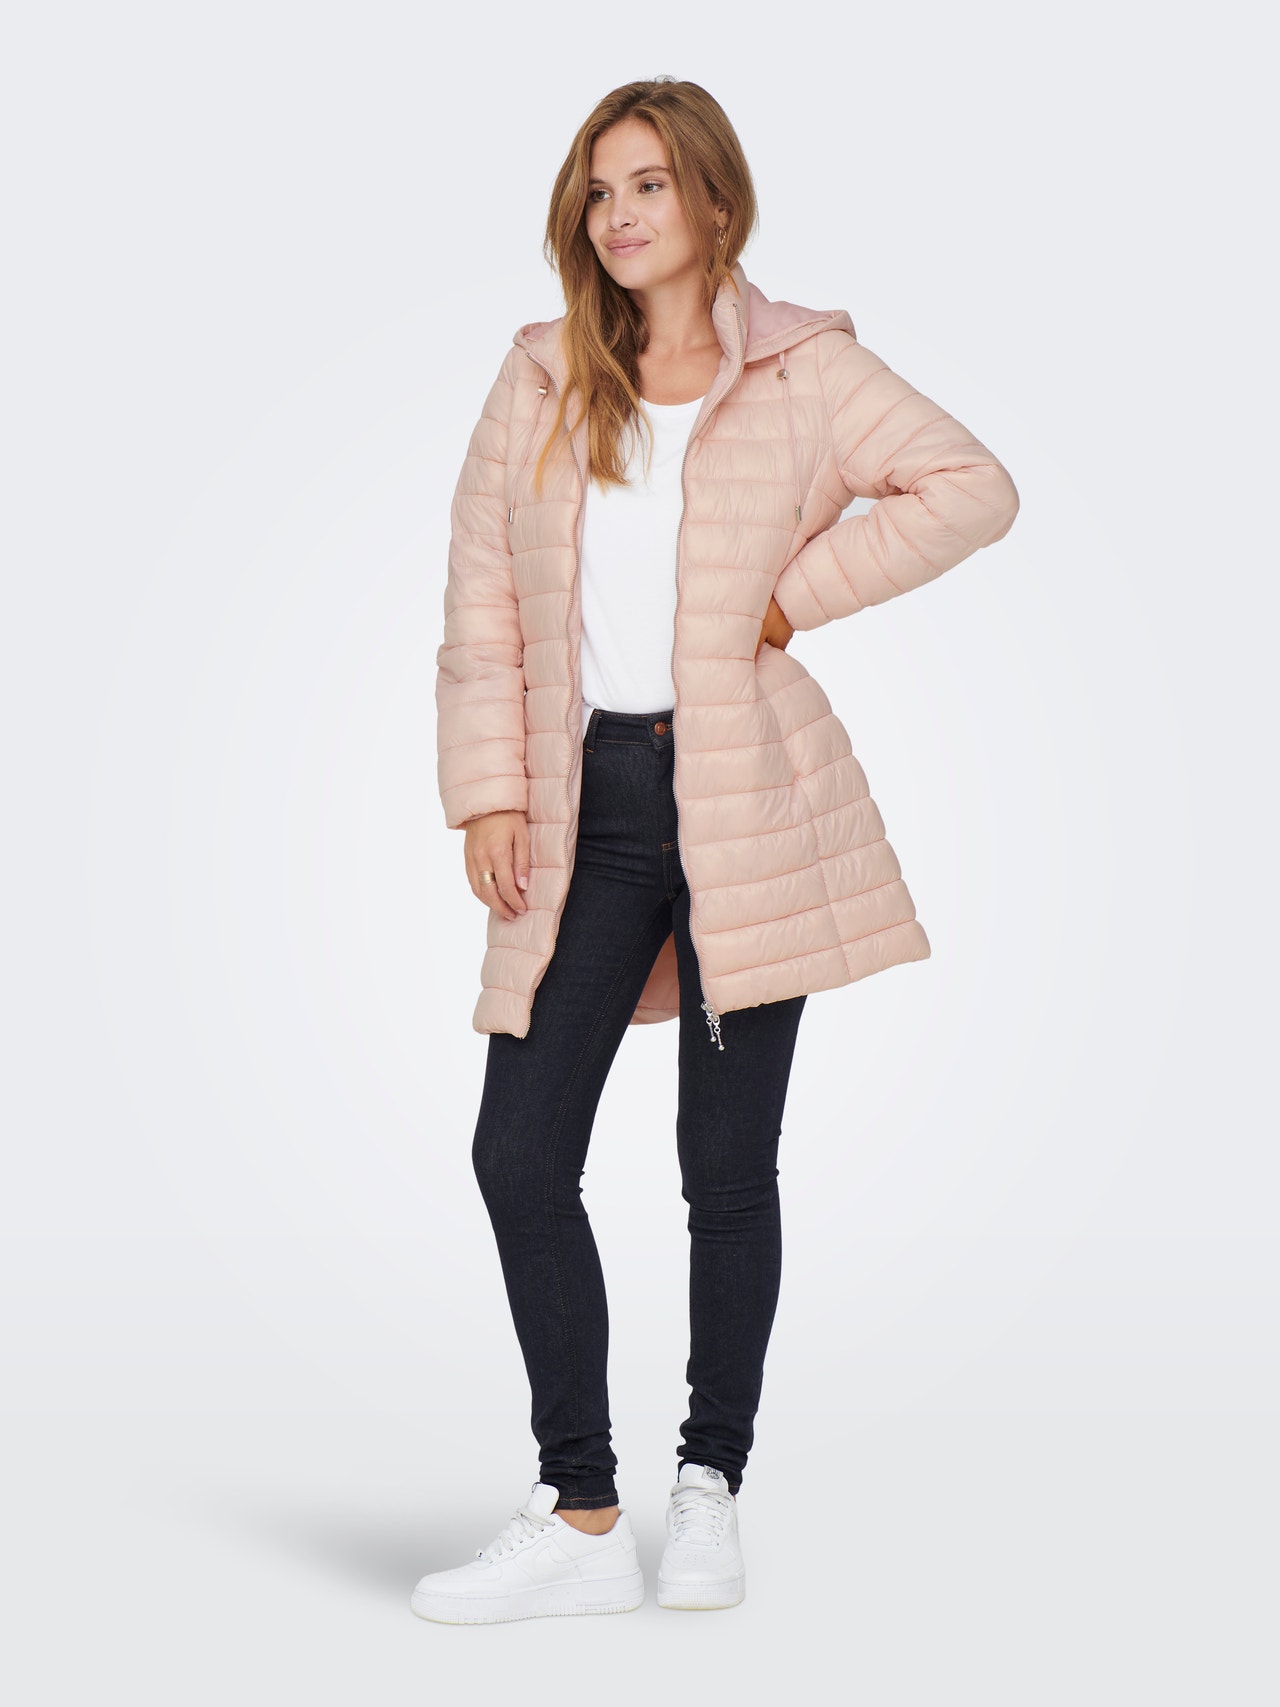 ONLY Quilted belt coat -Rose Smoke - 15262267